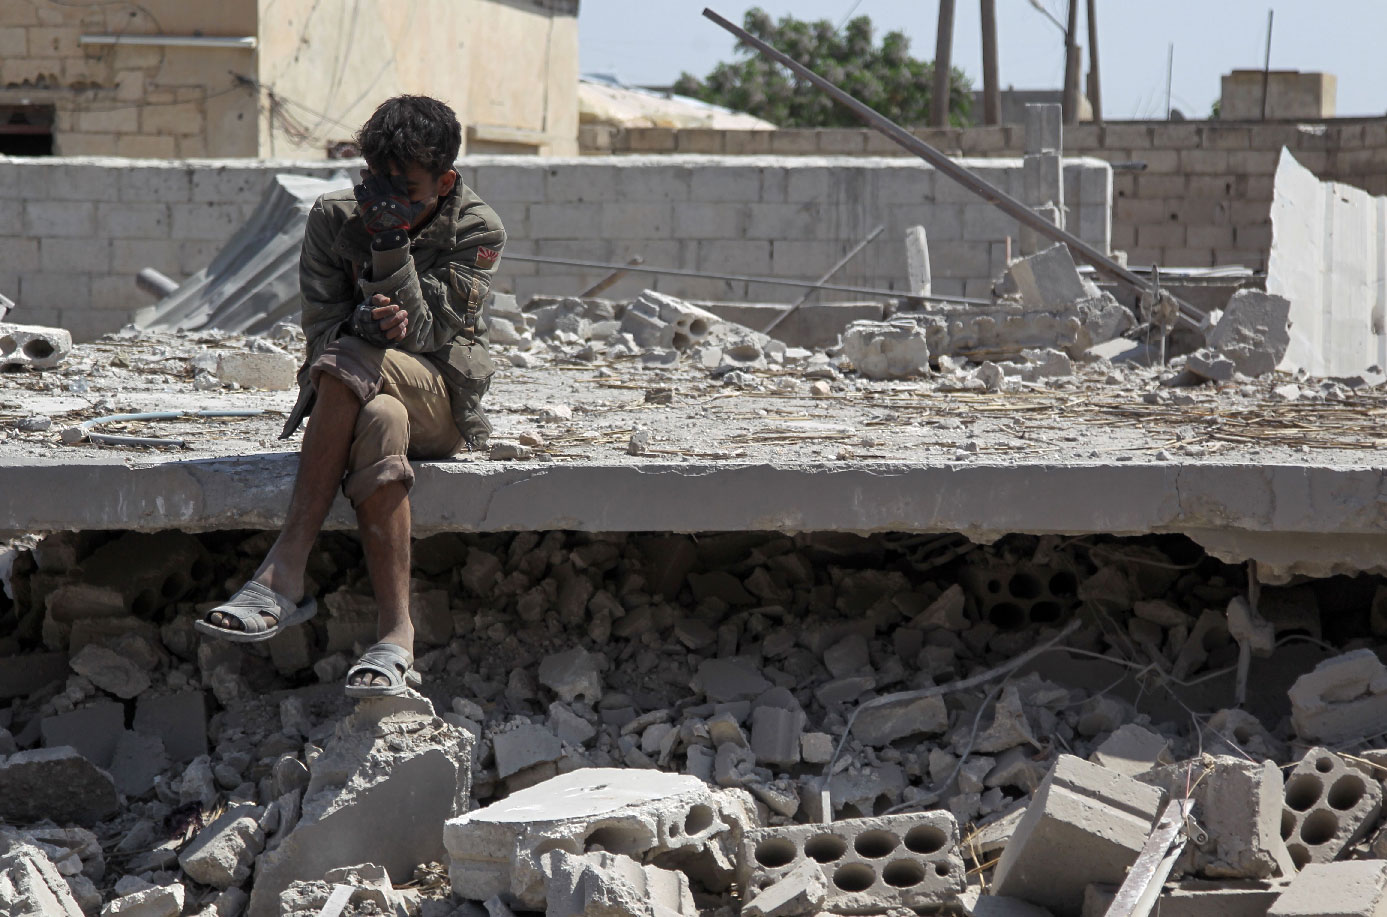 A man sits amidst the rubble of a building in Idlib, destroyed during airstrikes by the Syrian regime